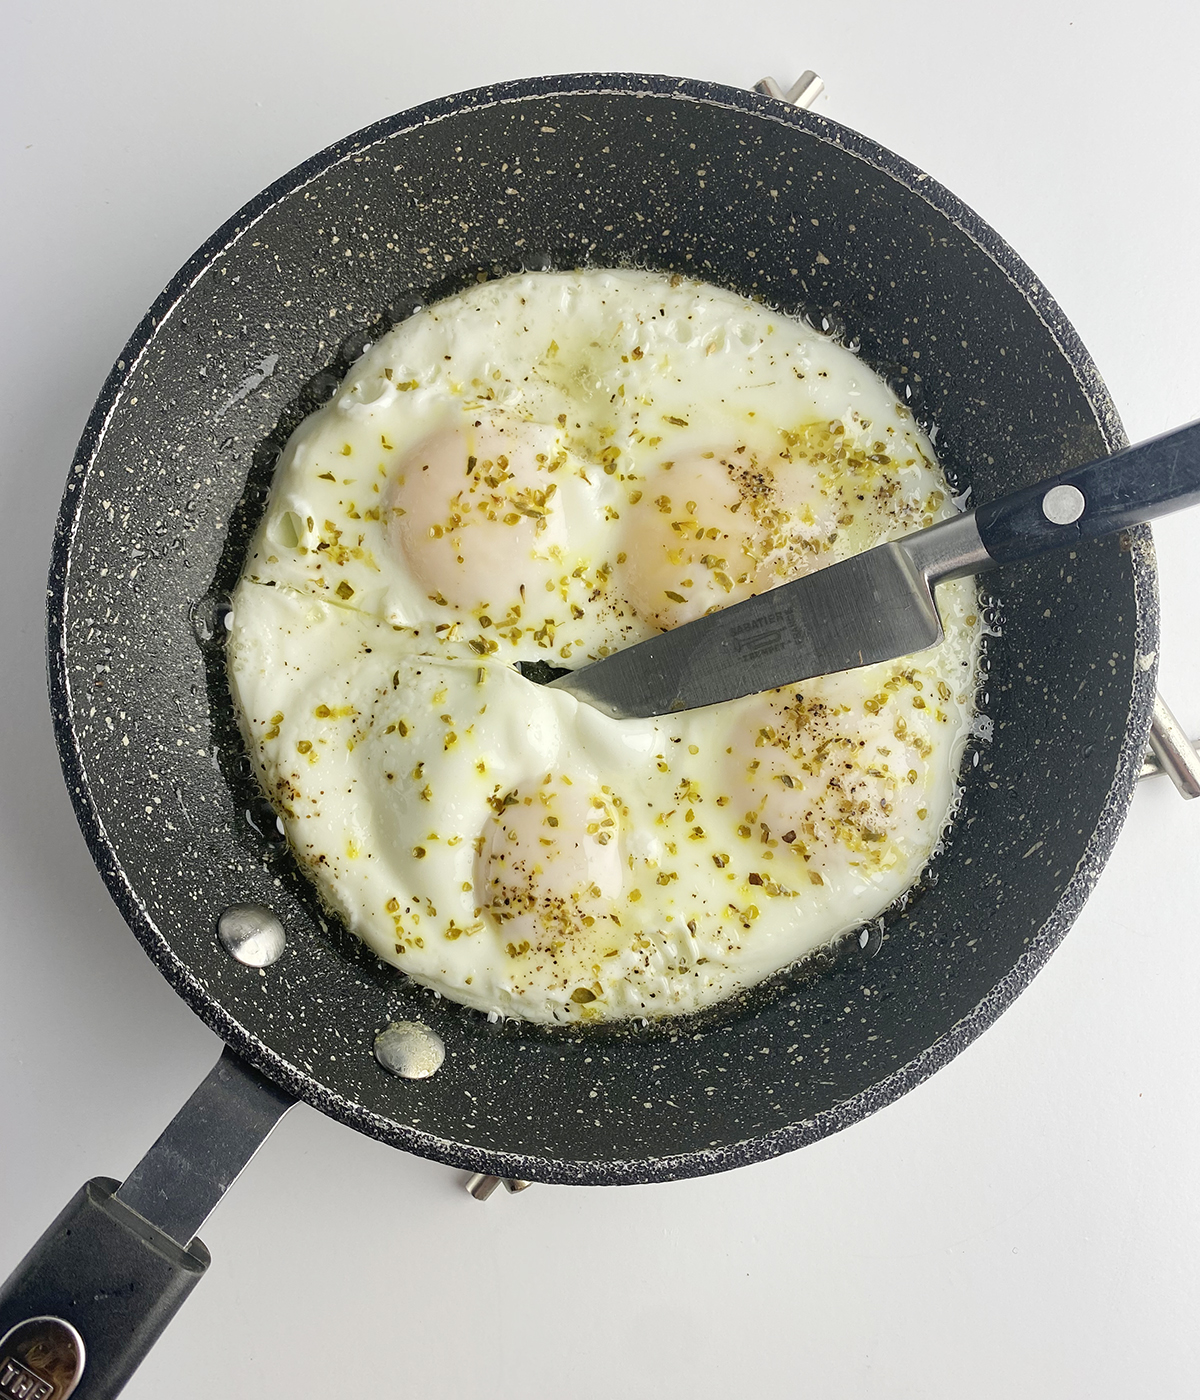 https://www.framedcooks.com/wp-content/uploads/2015/09/perfect-fried-eggs-in-a-skillet-being-cut-apart.jpg